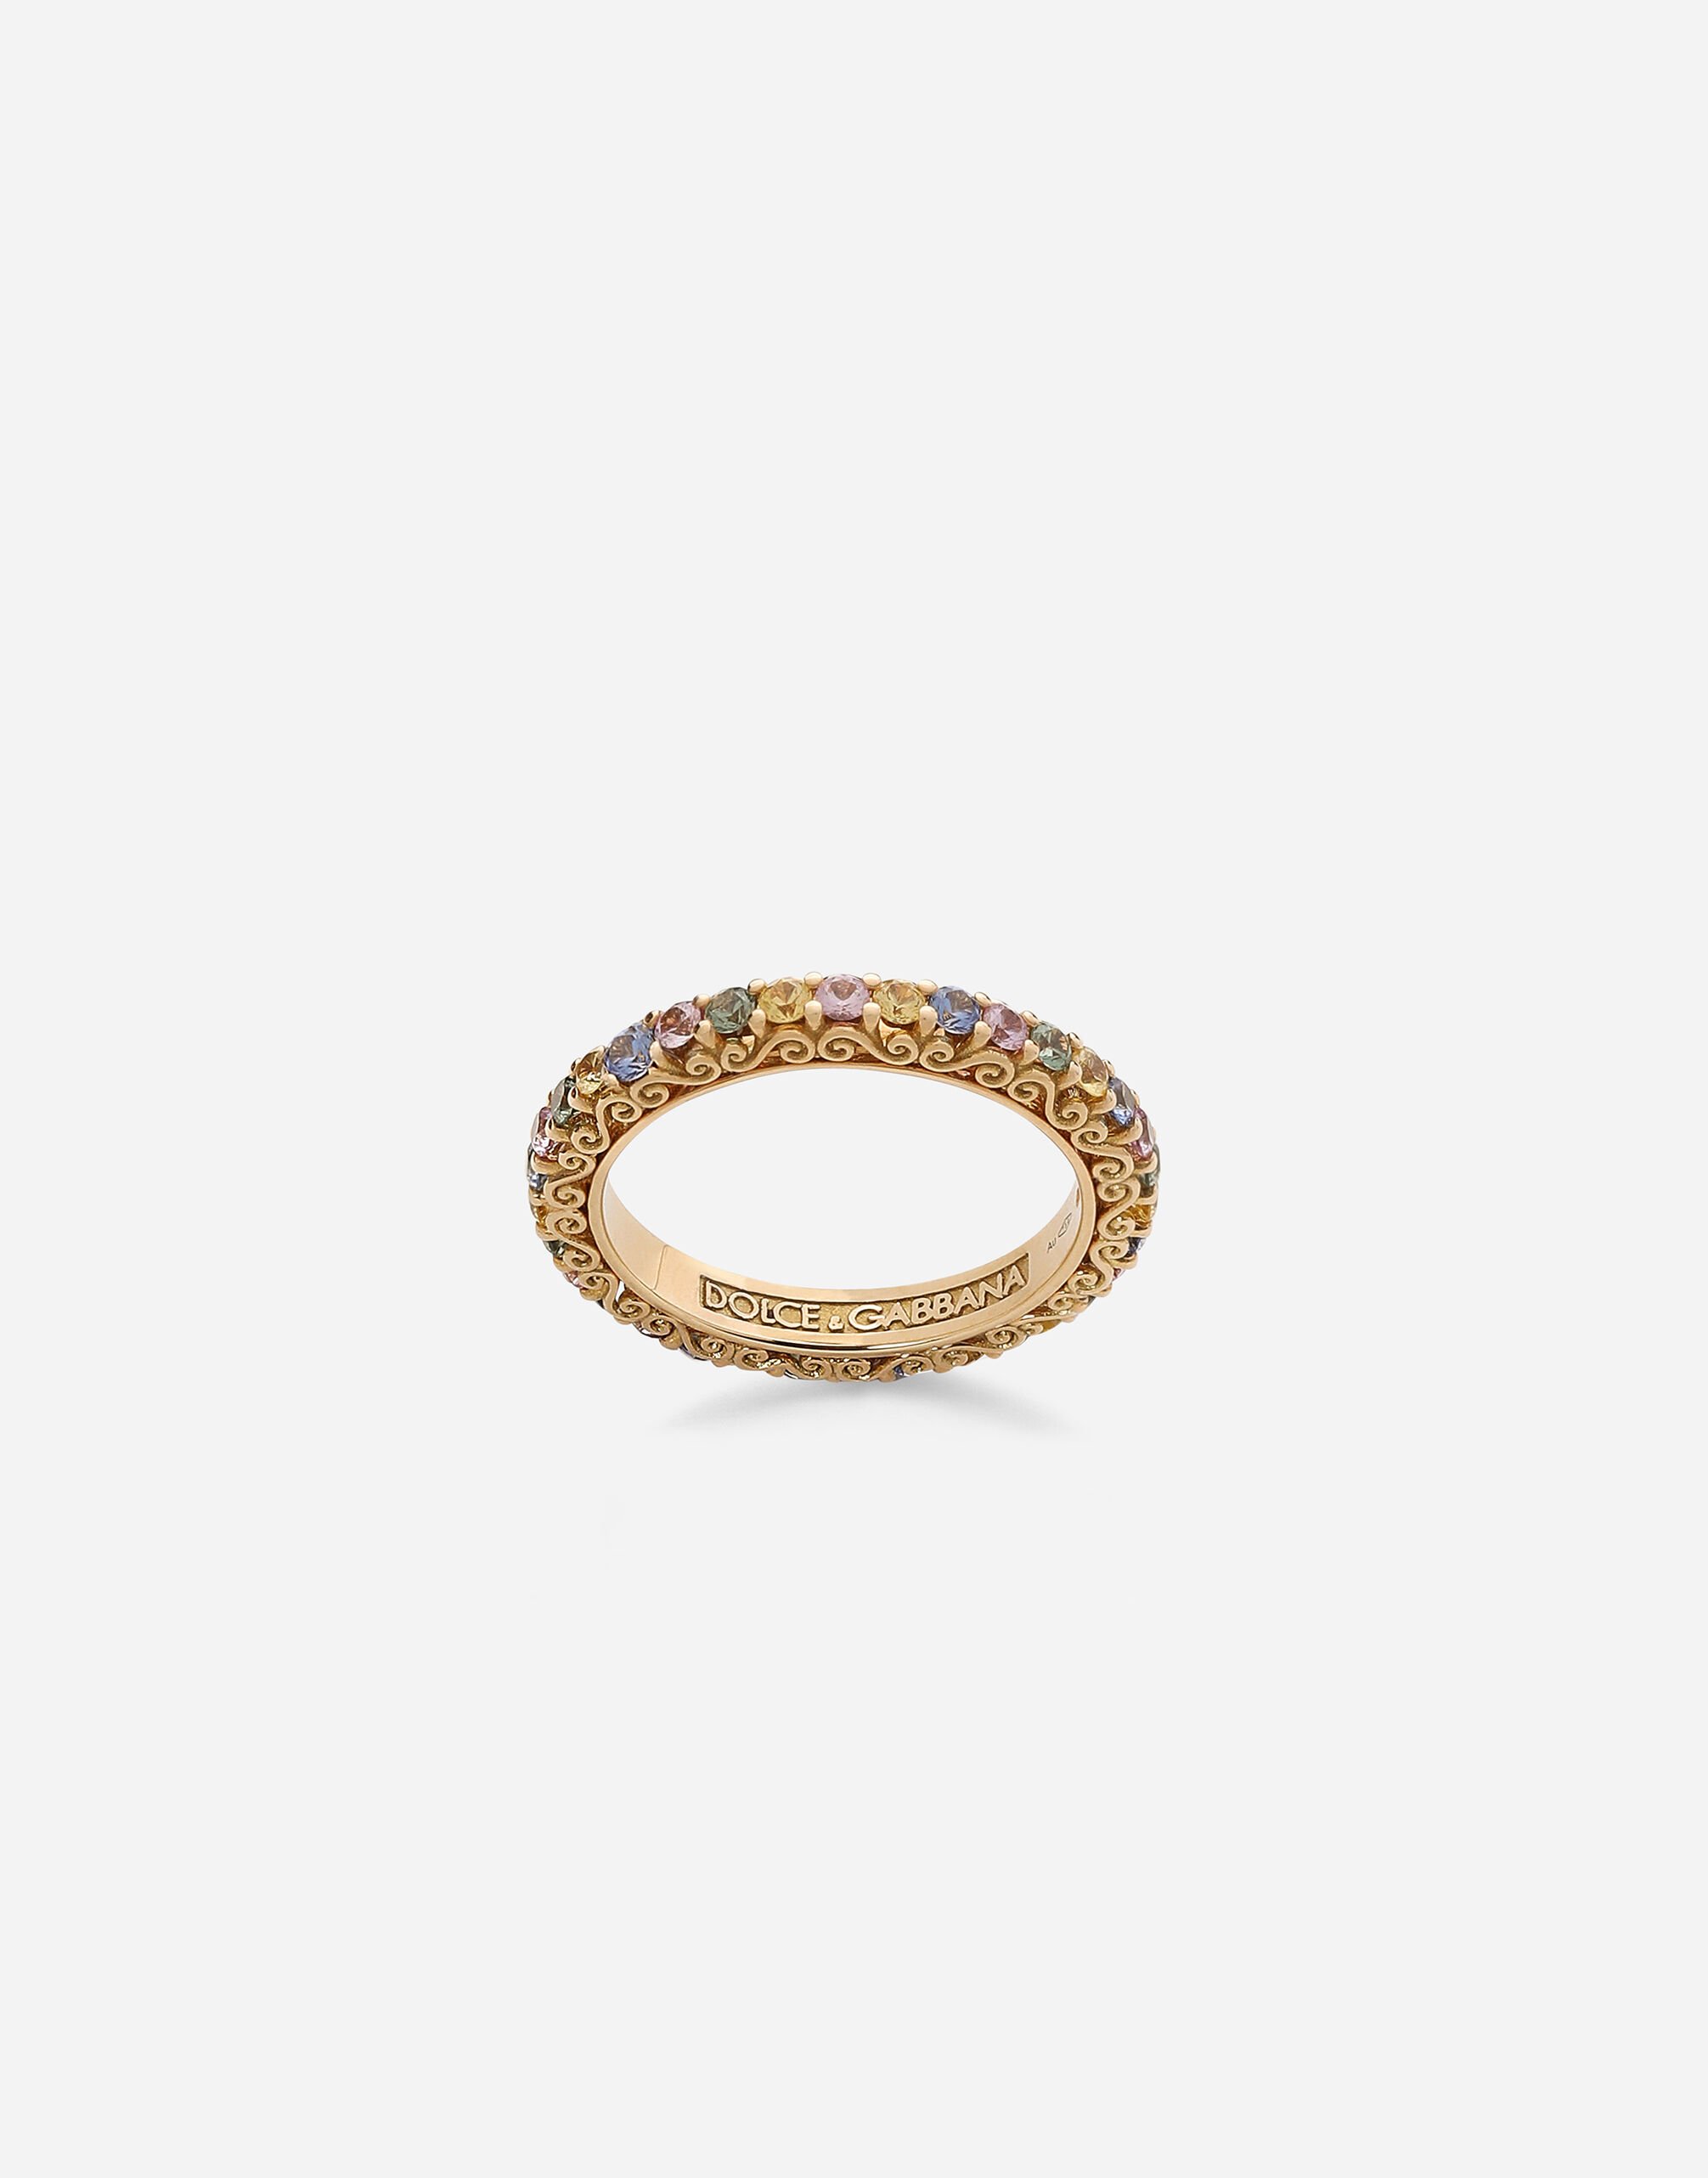 Dolce & Gabbana Heritage band ring in yellow 18kt gold with multicoloured sapphires Black WWJC2SXCMDT